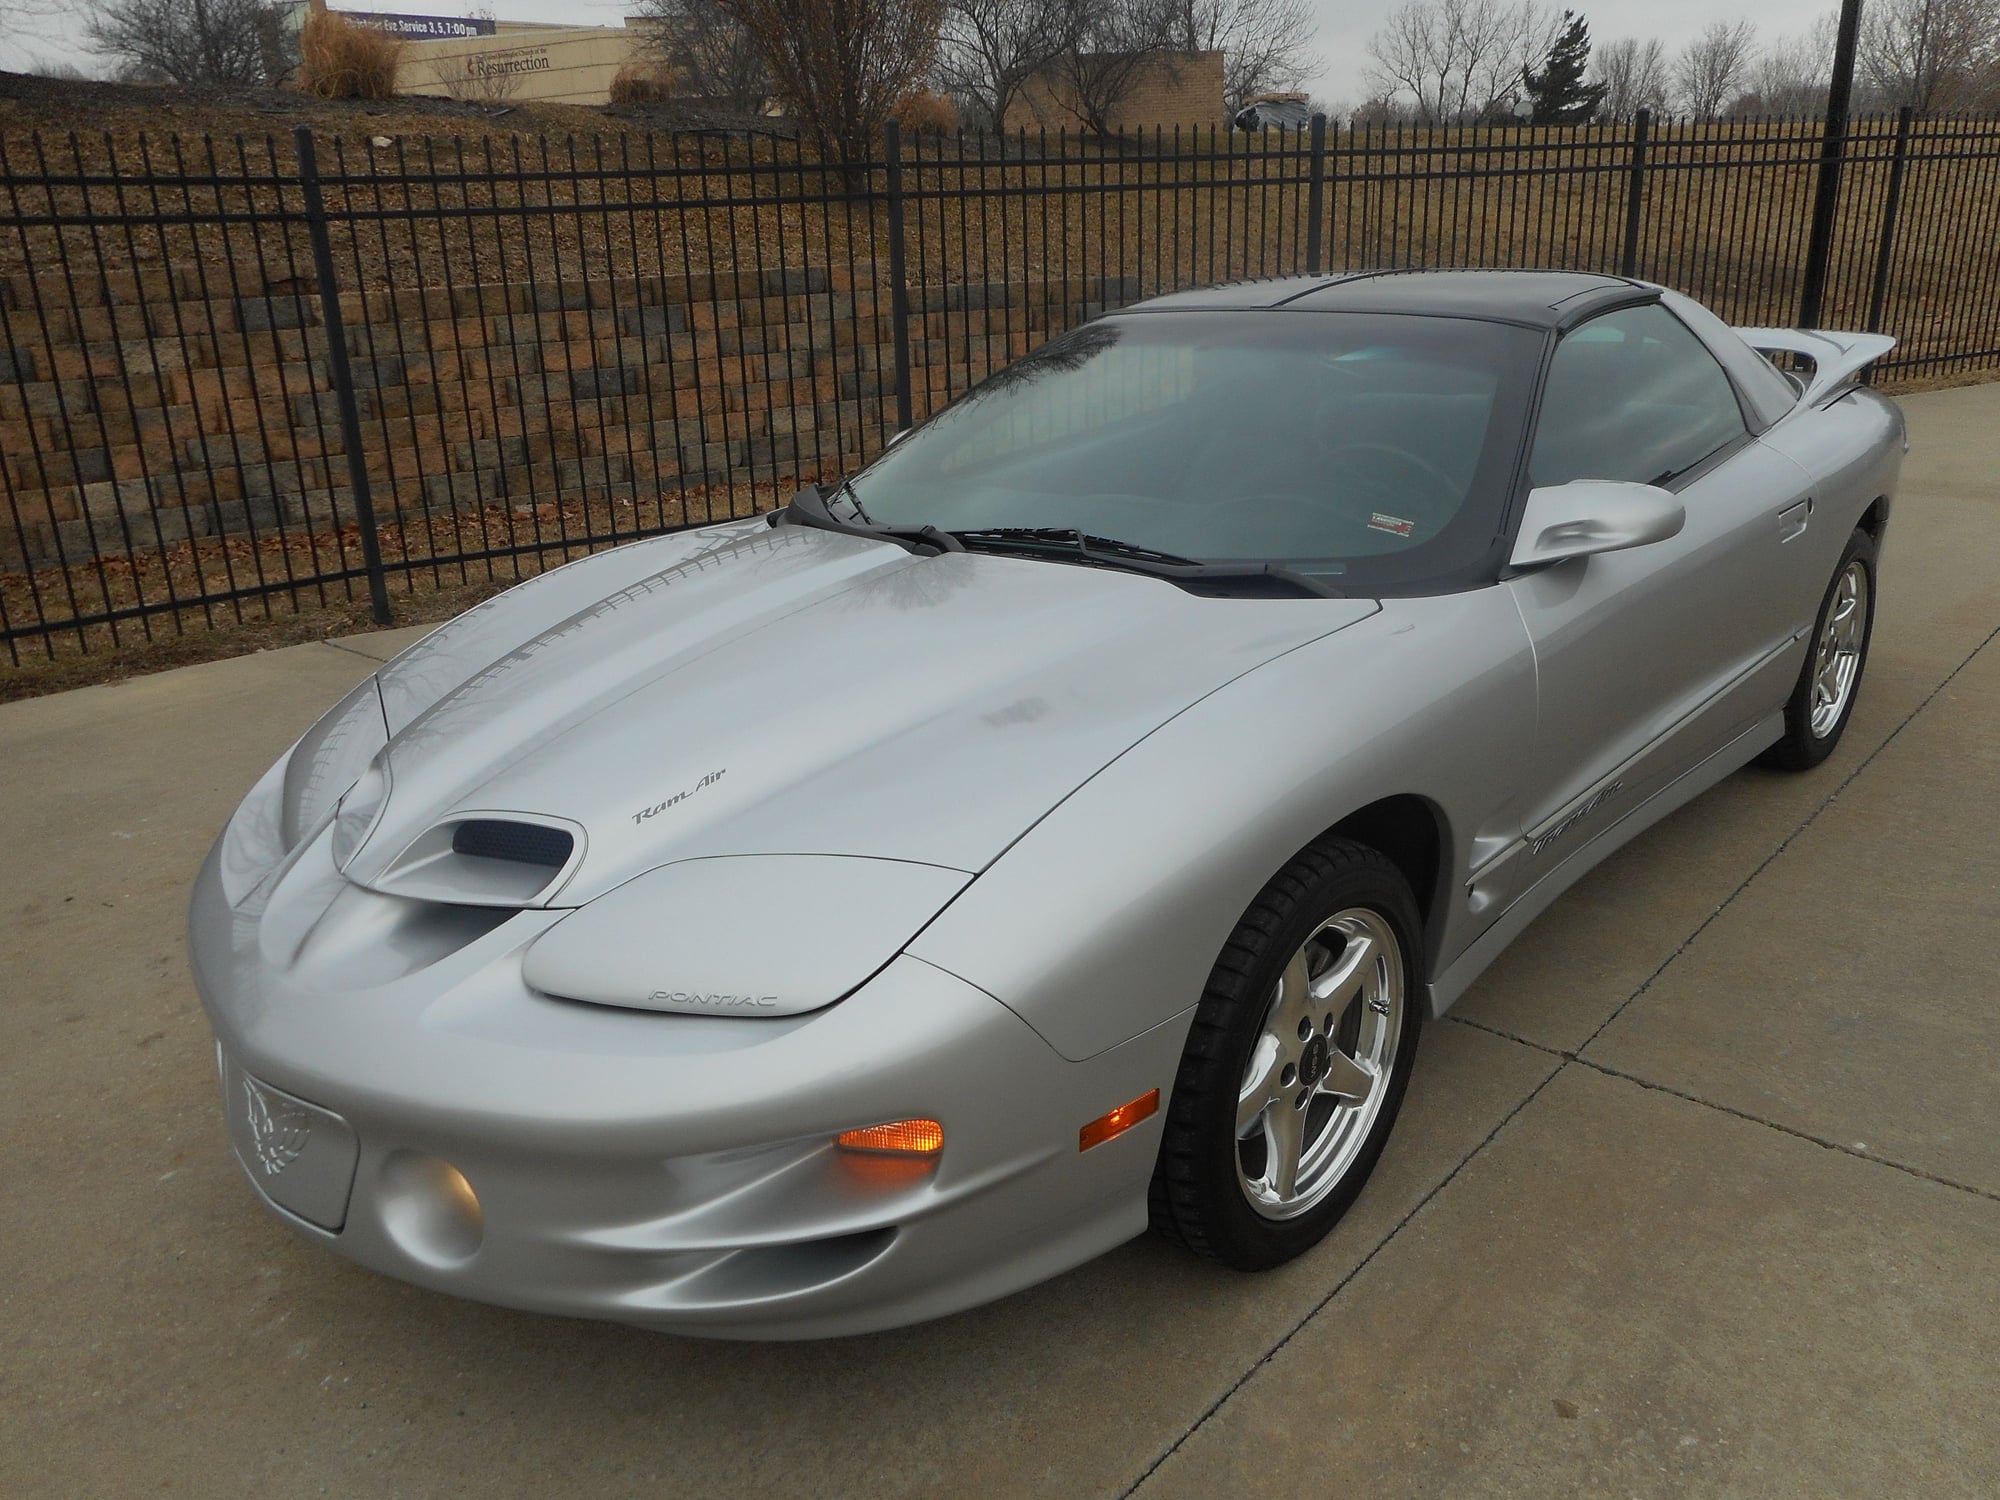 2000 Pontiac Firebird - 2000 ws6 trans am 6-speed 25k Pristine None Better - Used - VIN 2G2FV22G4Y215609 - 24 Miles - 8 cyl - 2WD - Manual - Coupe - Silver - Blue Springs, MO 64015, United States